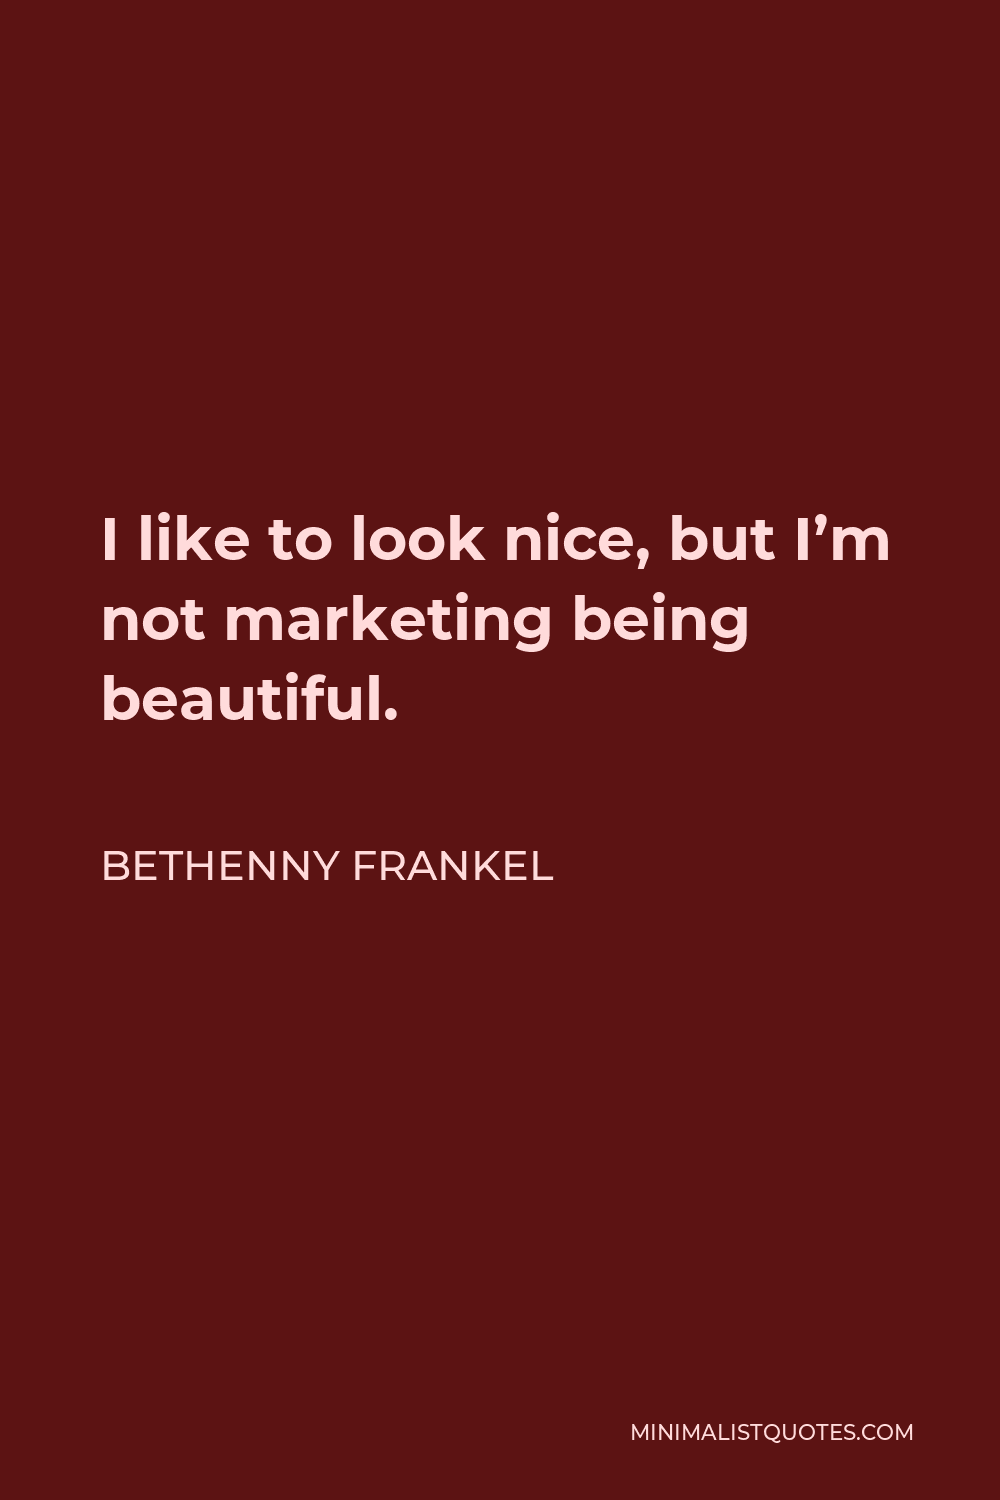 Bethenny Frankel Quote - I like to look nice, but I’m not marketing being beautiful.